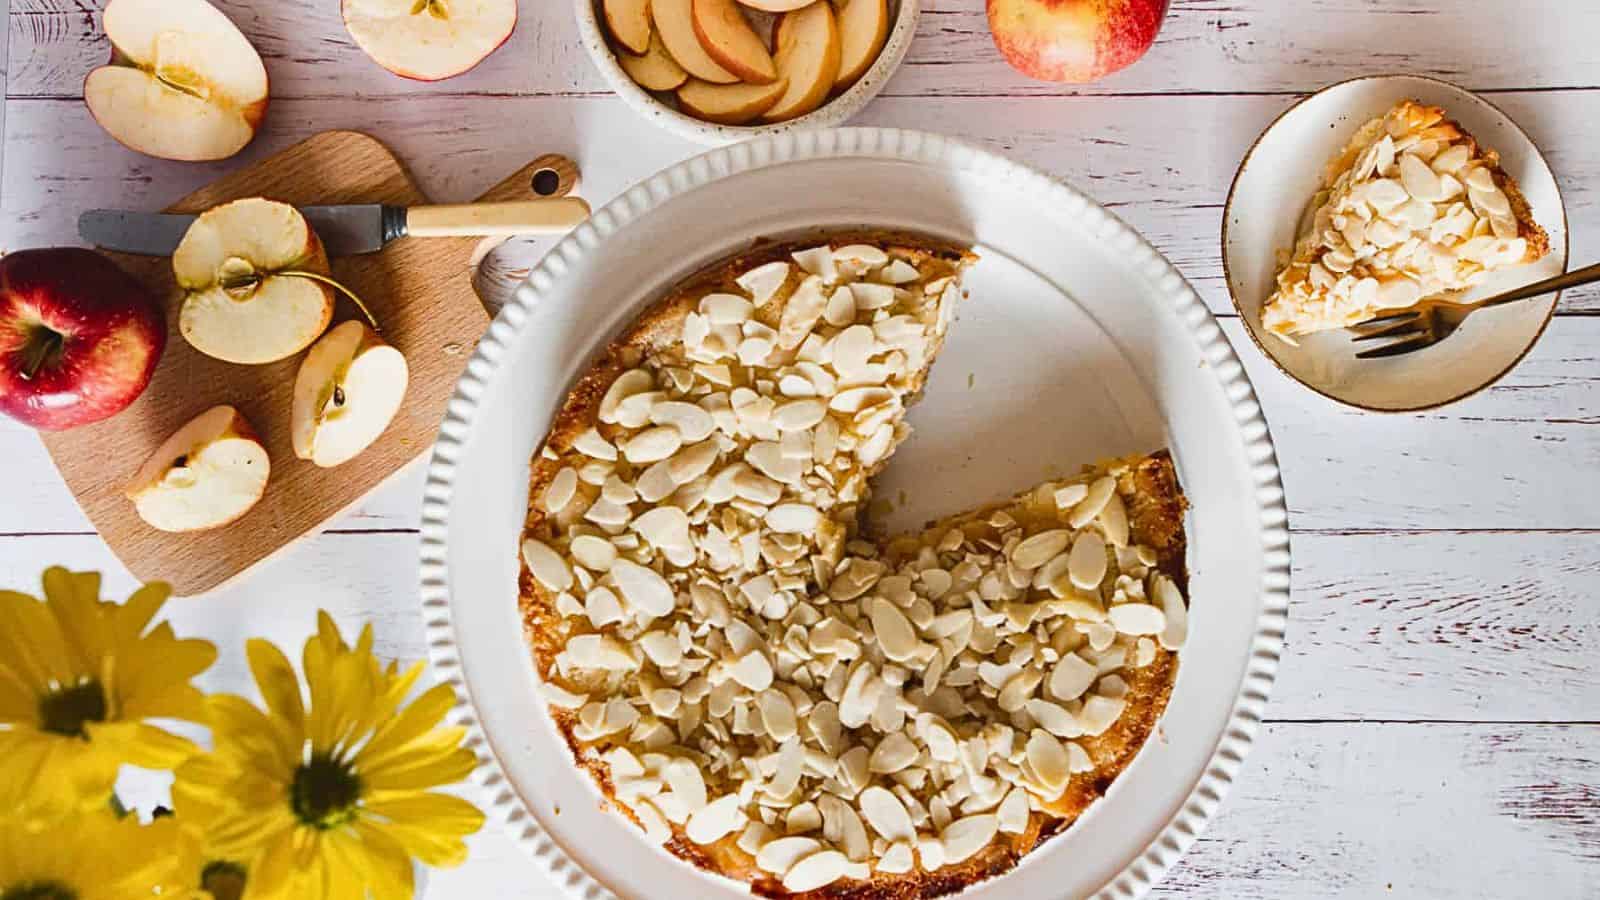 <p>Almond Apple Cake is a gluten-free dessert that can be enjoyed in about 1 hour. The combination of almonds and apples creates a moist cake with a nutty flavor, complemented by the natural sweetness of the fruit.<br><strong>Get the Recipe: </strong><a href="https://immigrantstable.com/gluten-free-apple-cake/?utm_source=msn&utm_medium=page&utm_campaign=33%20easy%20apple%20recipes%20for%20picky%20eaters">Almond Apple Cake</a></p>